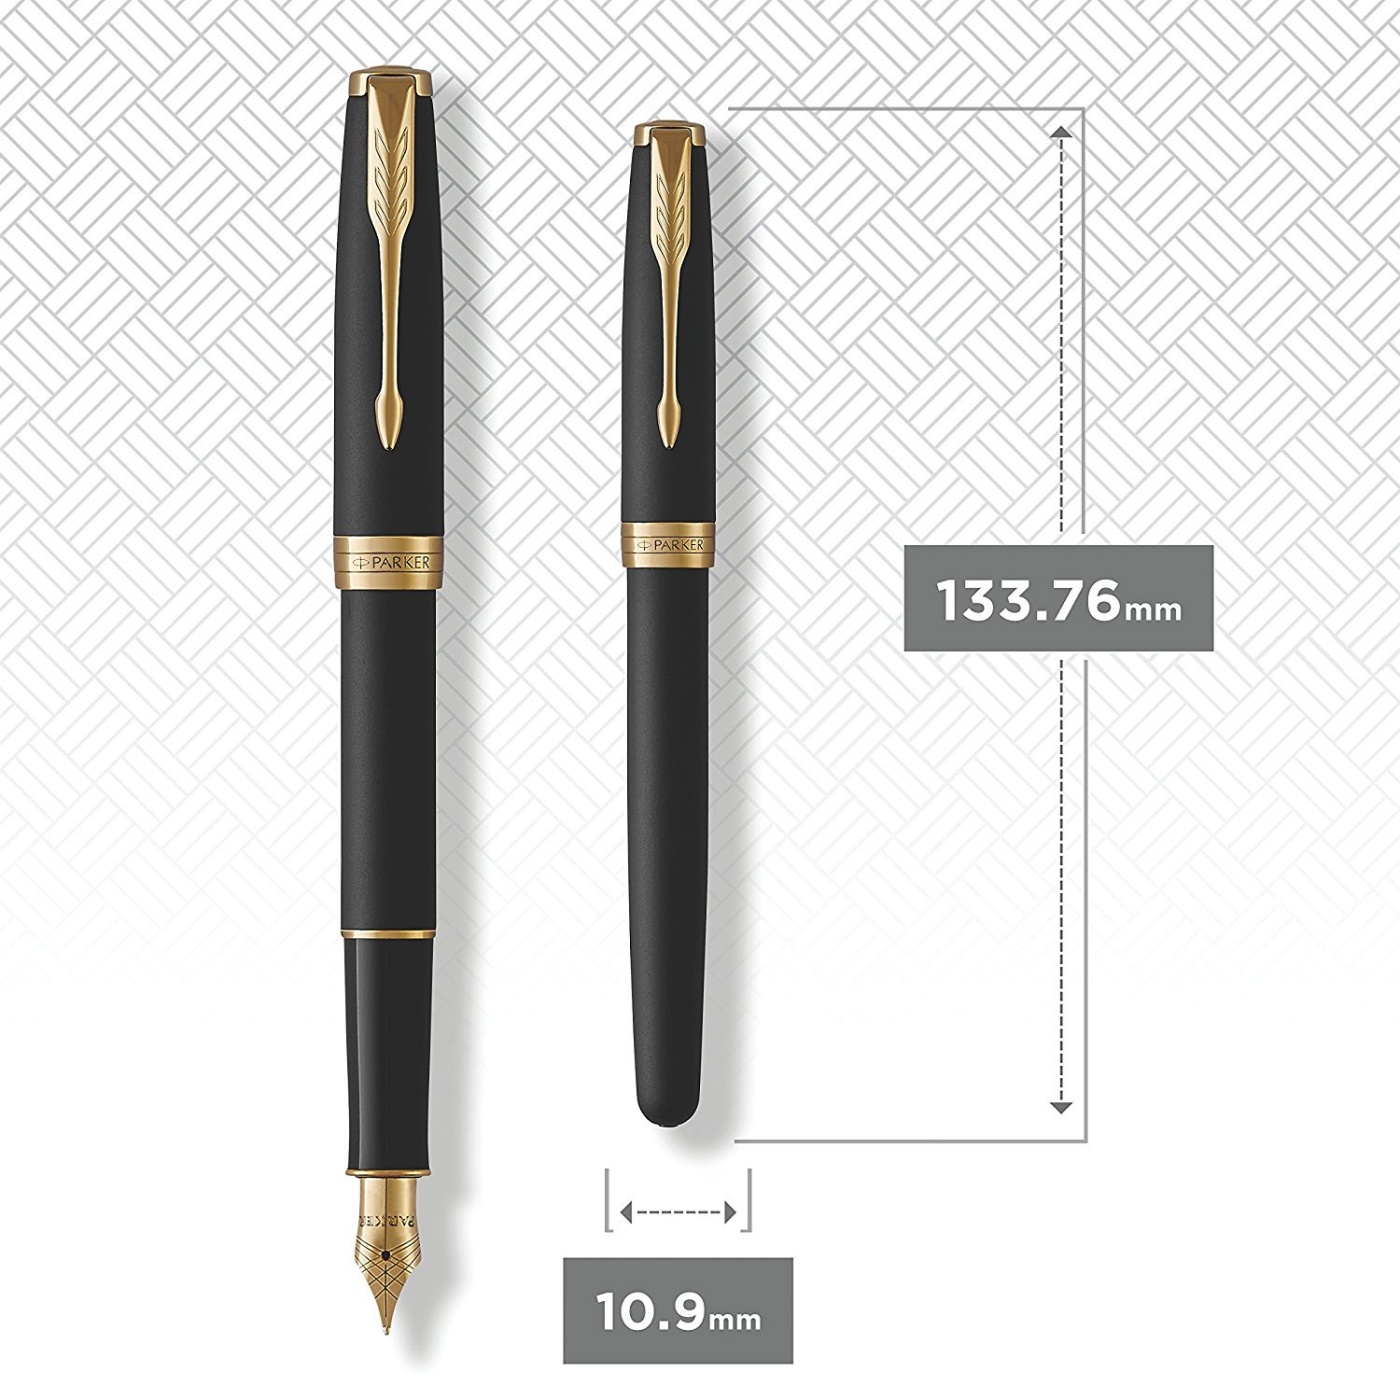 Sonnet Black/Gold Fountain pen in the group Pens / Fine Writing / Engraving at Voorcrea (104695_r)